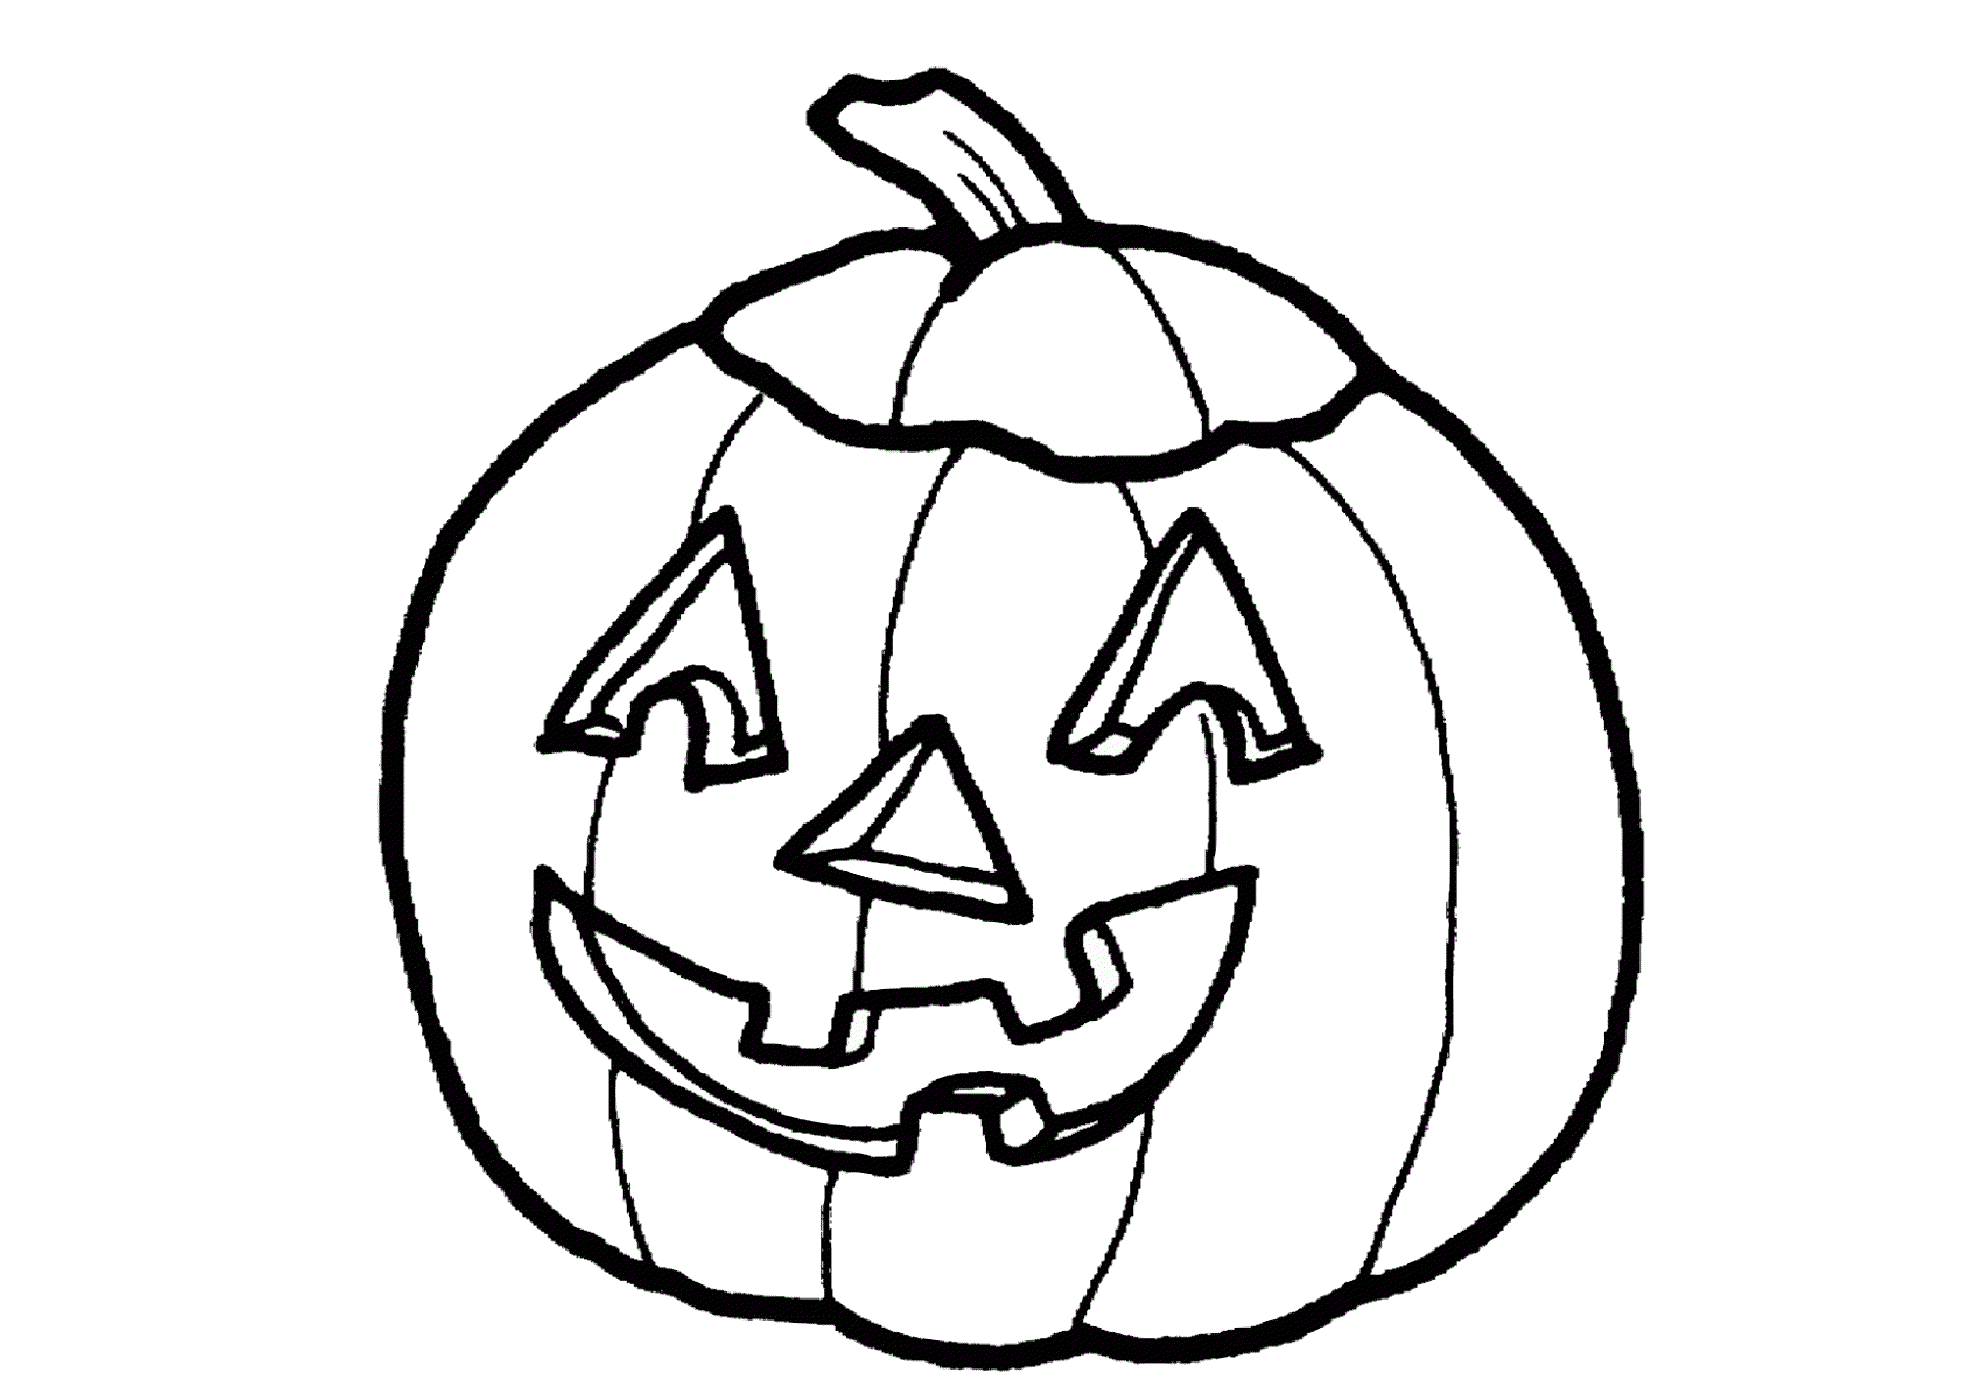 Carved Pumpkin Coloring Page for Preschoolers